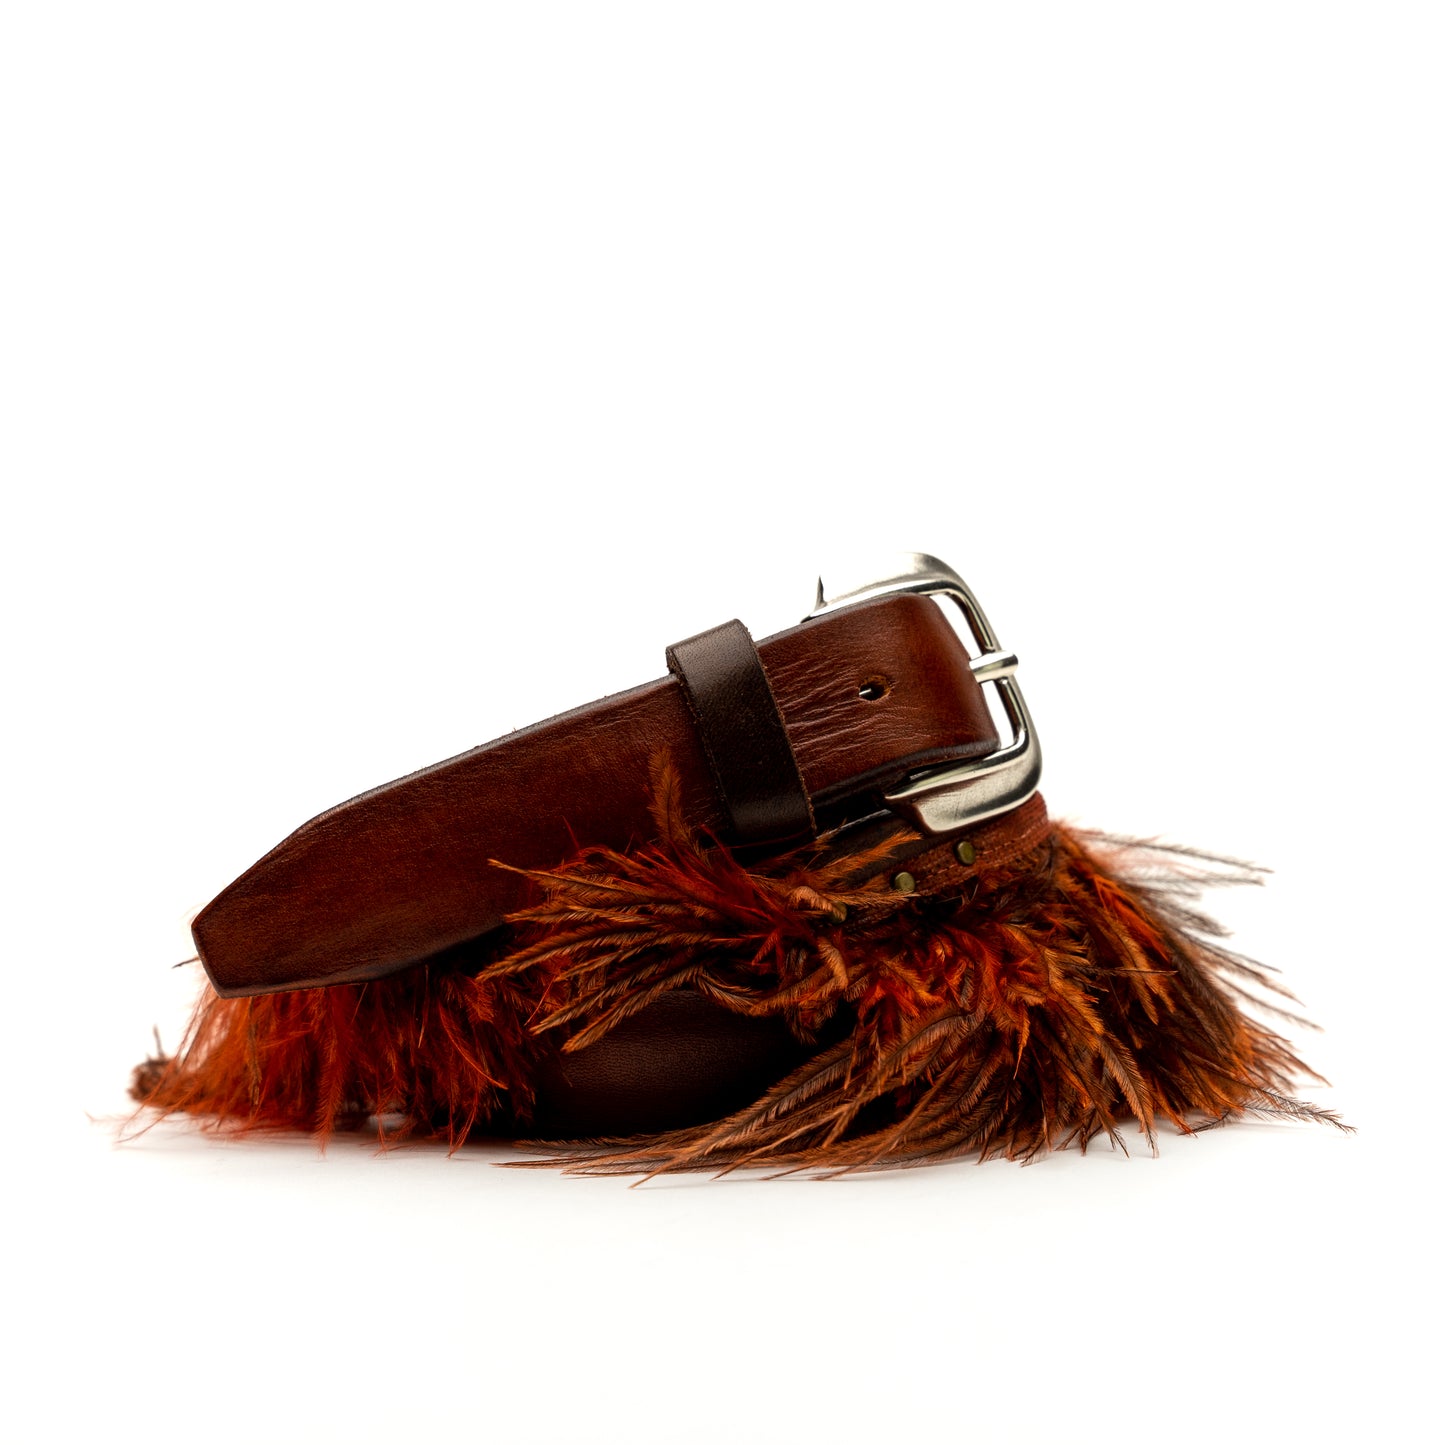 Vintage Brown Leather Belt Feathers and Navajo Decorations